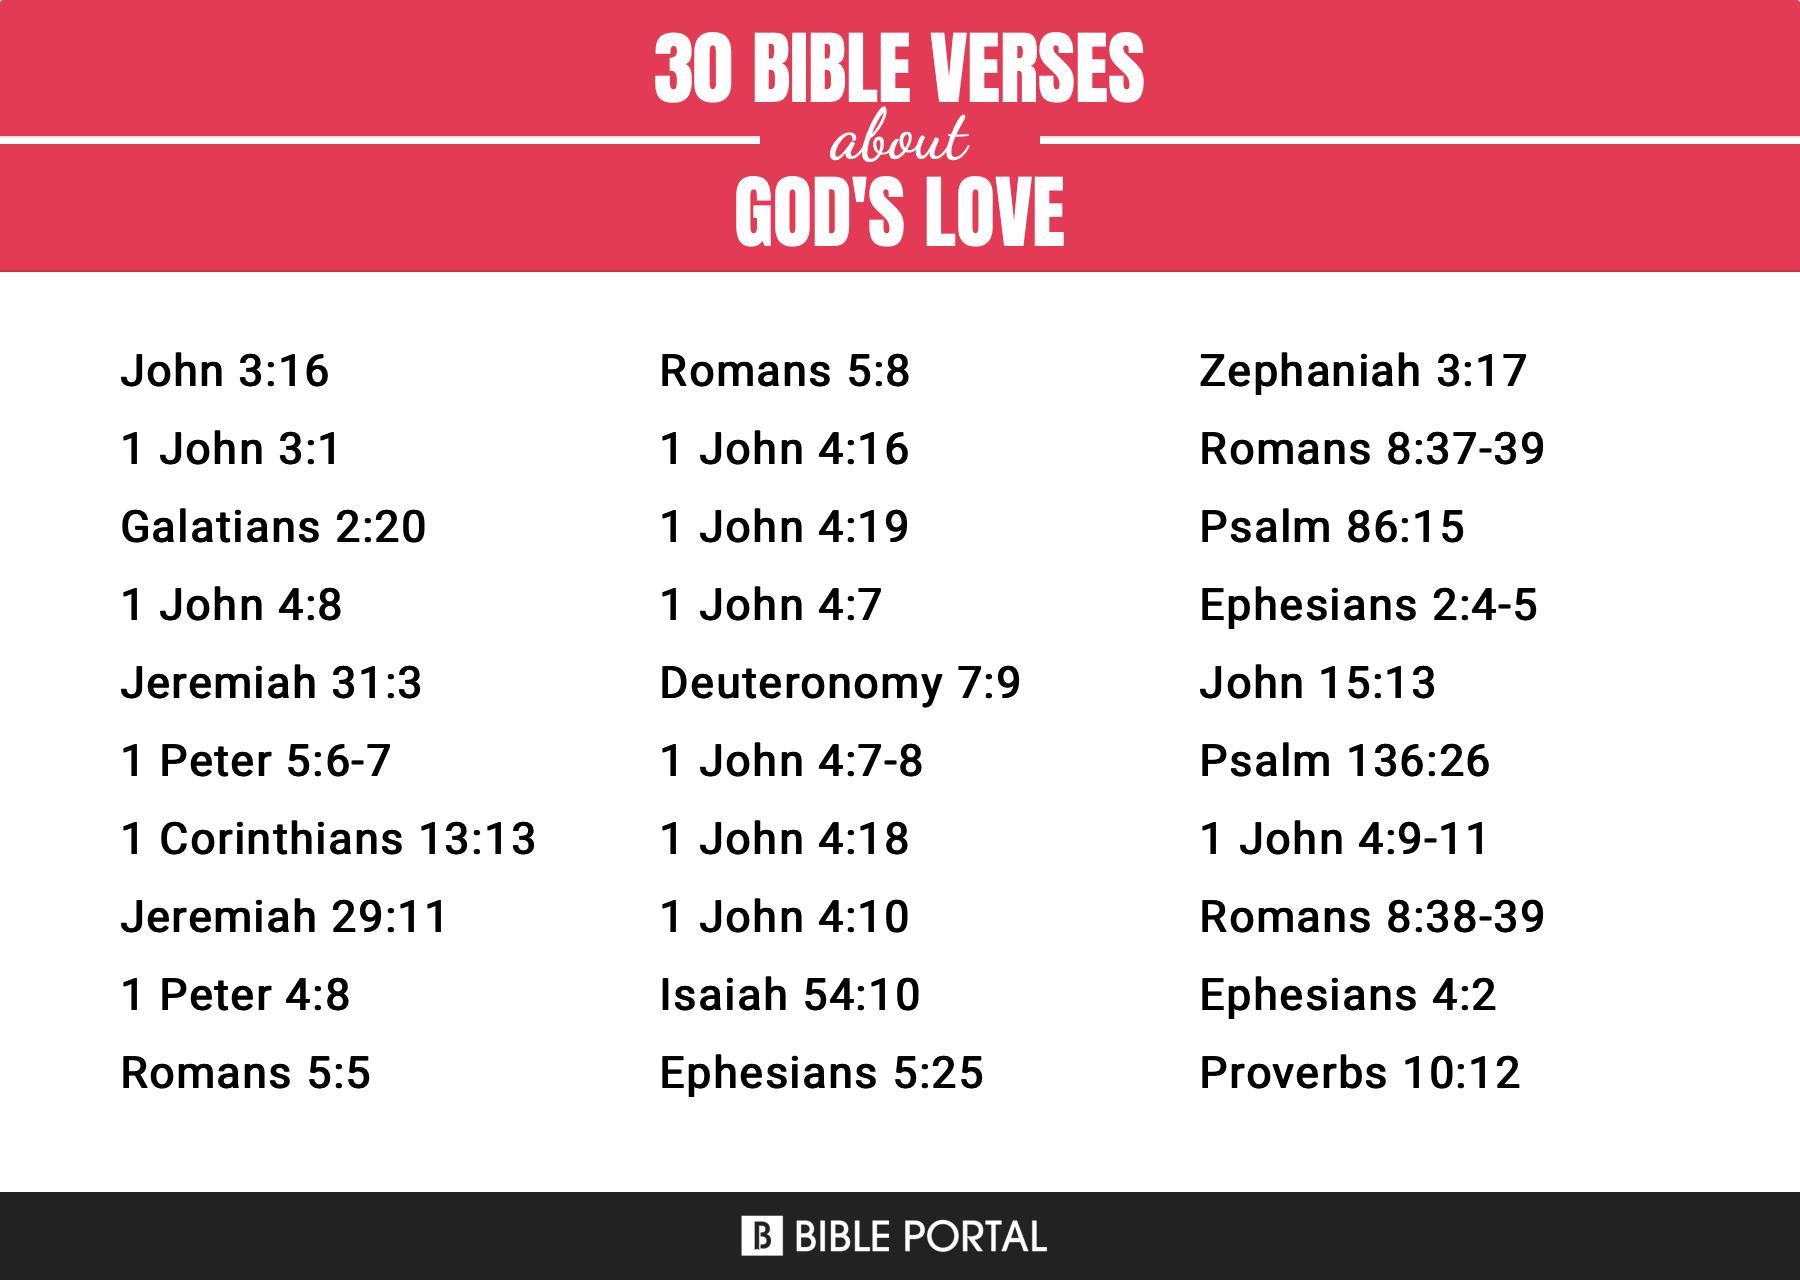 What Does the Bible Say about God's Love?